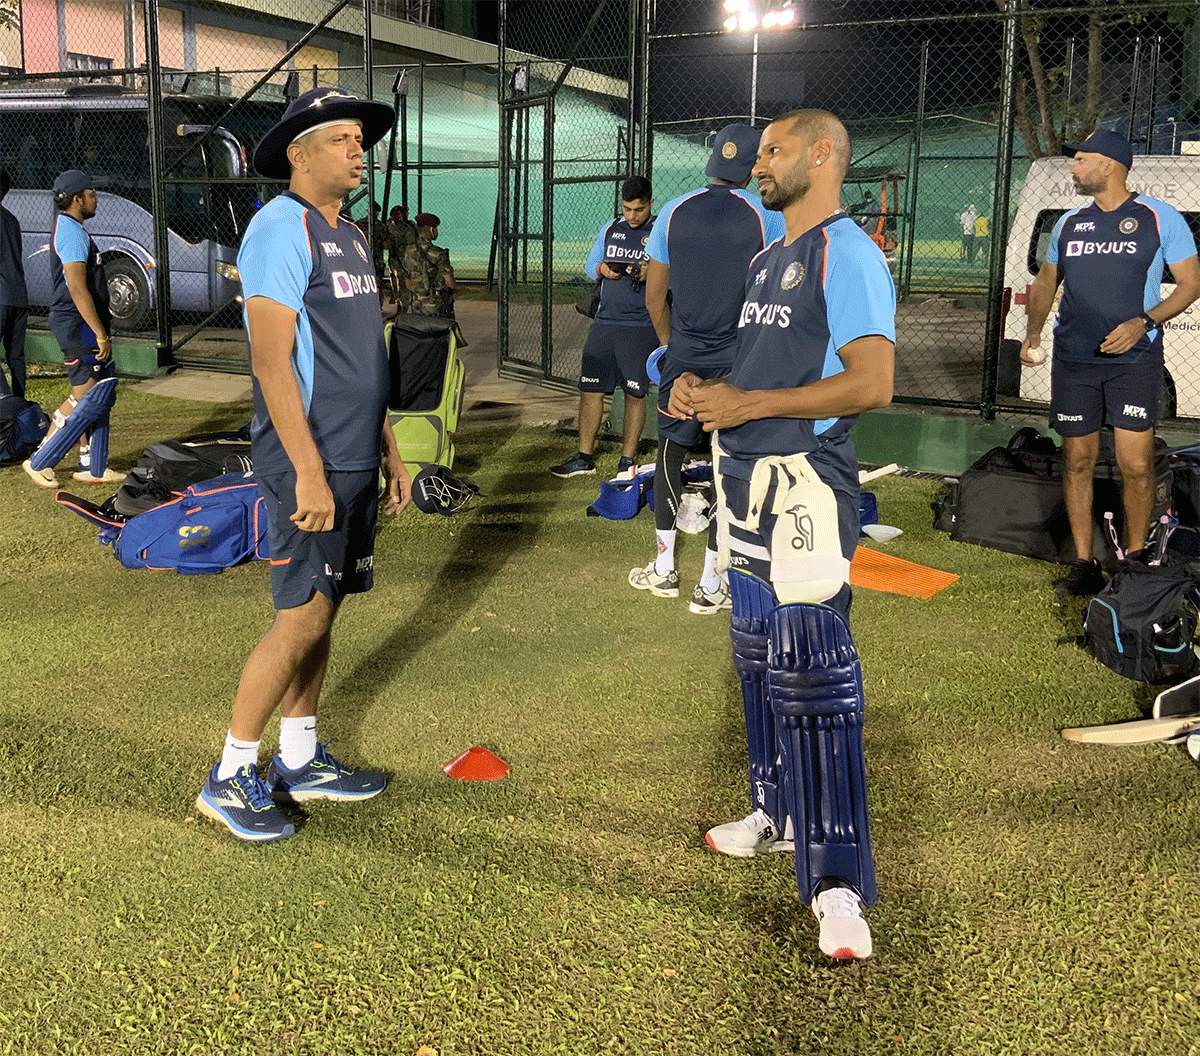 India coach Rahul Dravid and skipper Shikhar Dhawan chat during a practice session on Saturday. Like coach Dravid had mentioned earlier, skipper Dhawan also said that there is no hard and fast rule that they have to try out each and every player in this series against Sri Lanka.